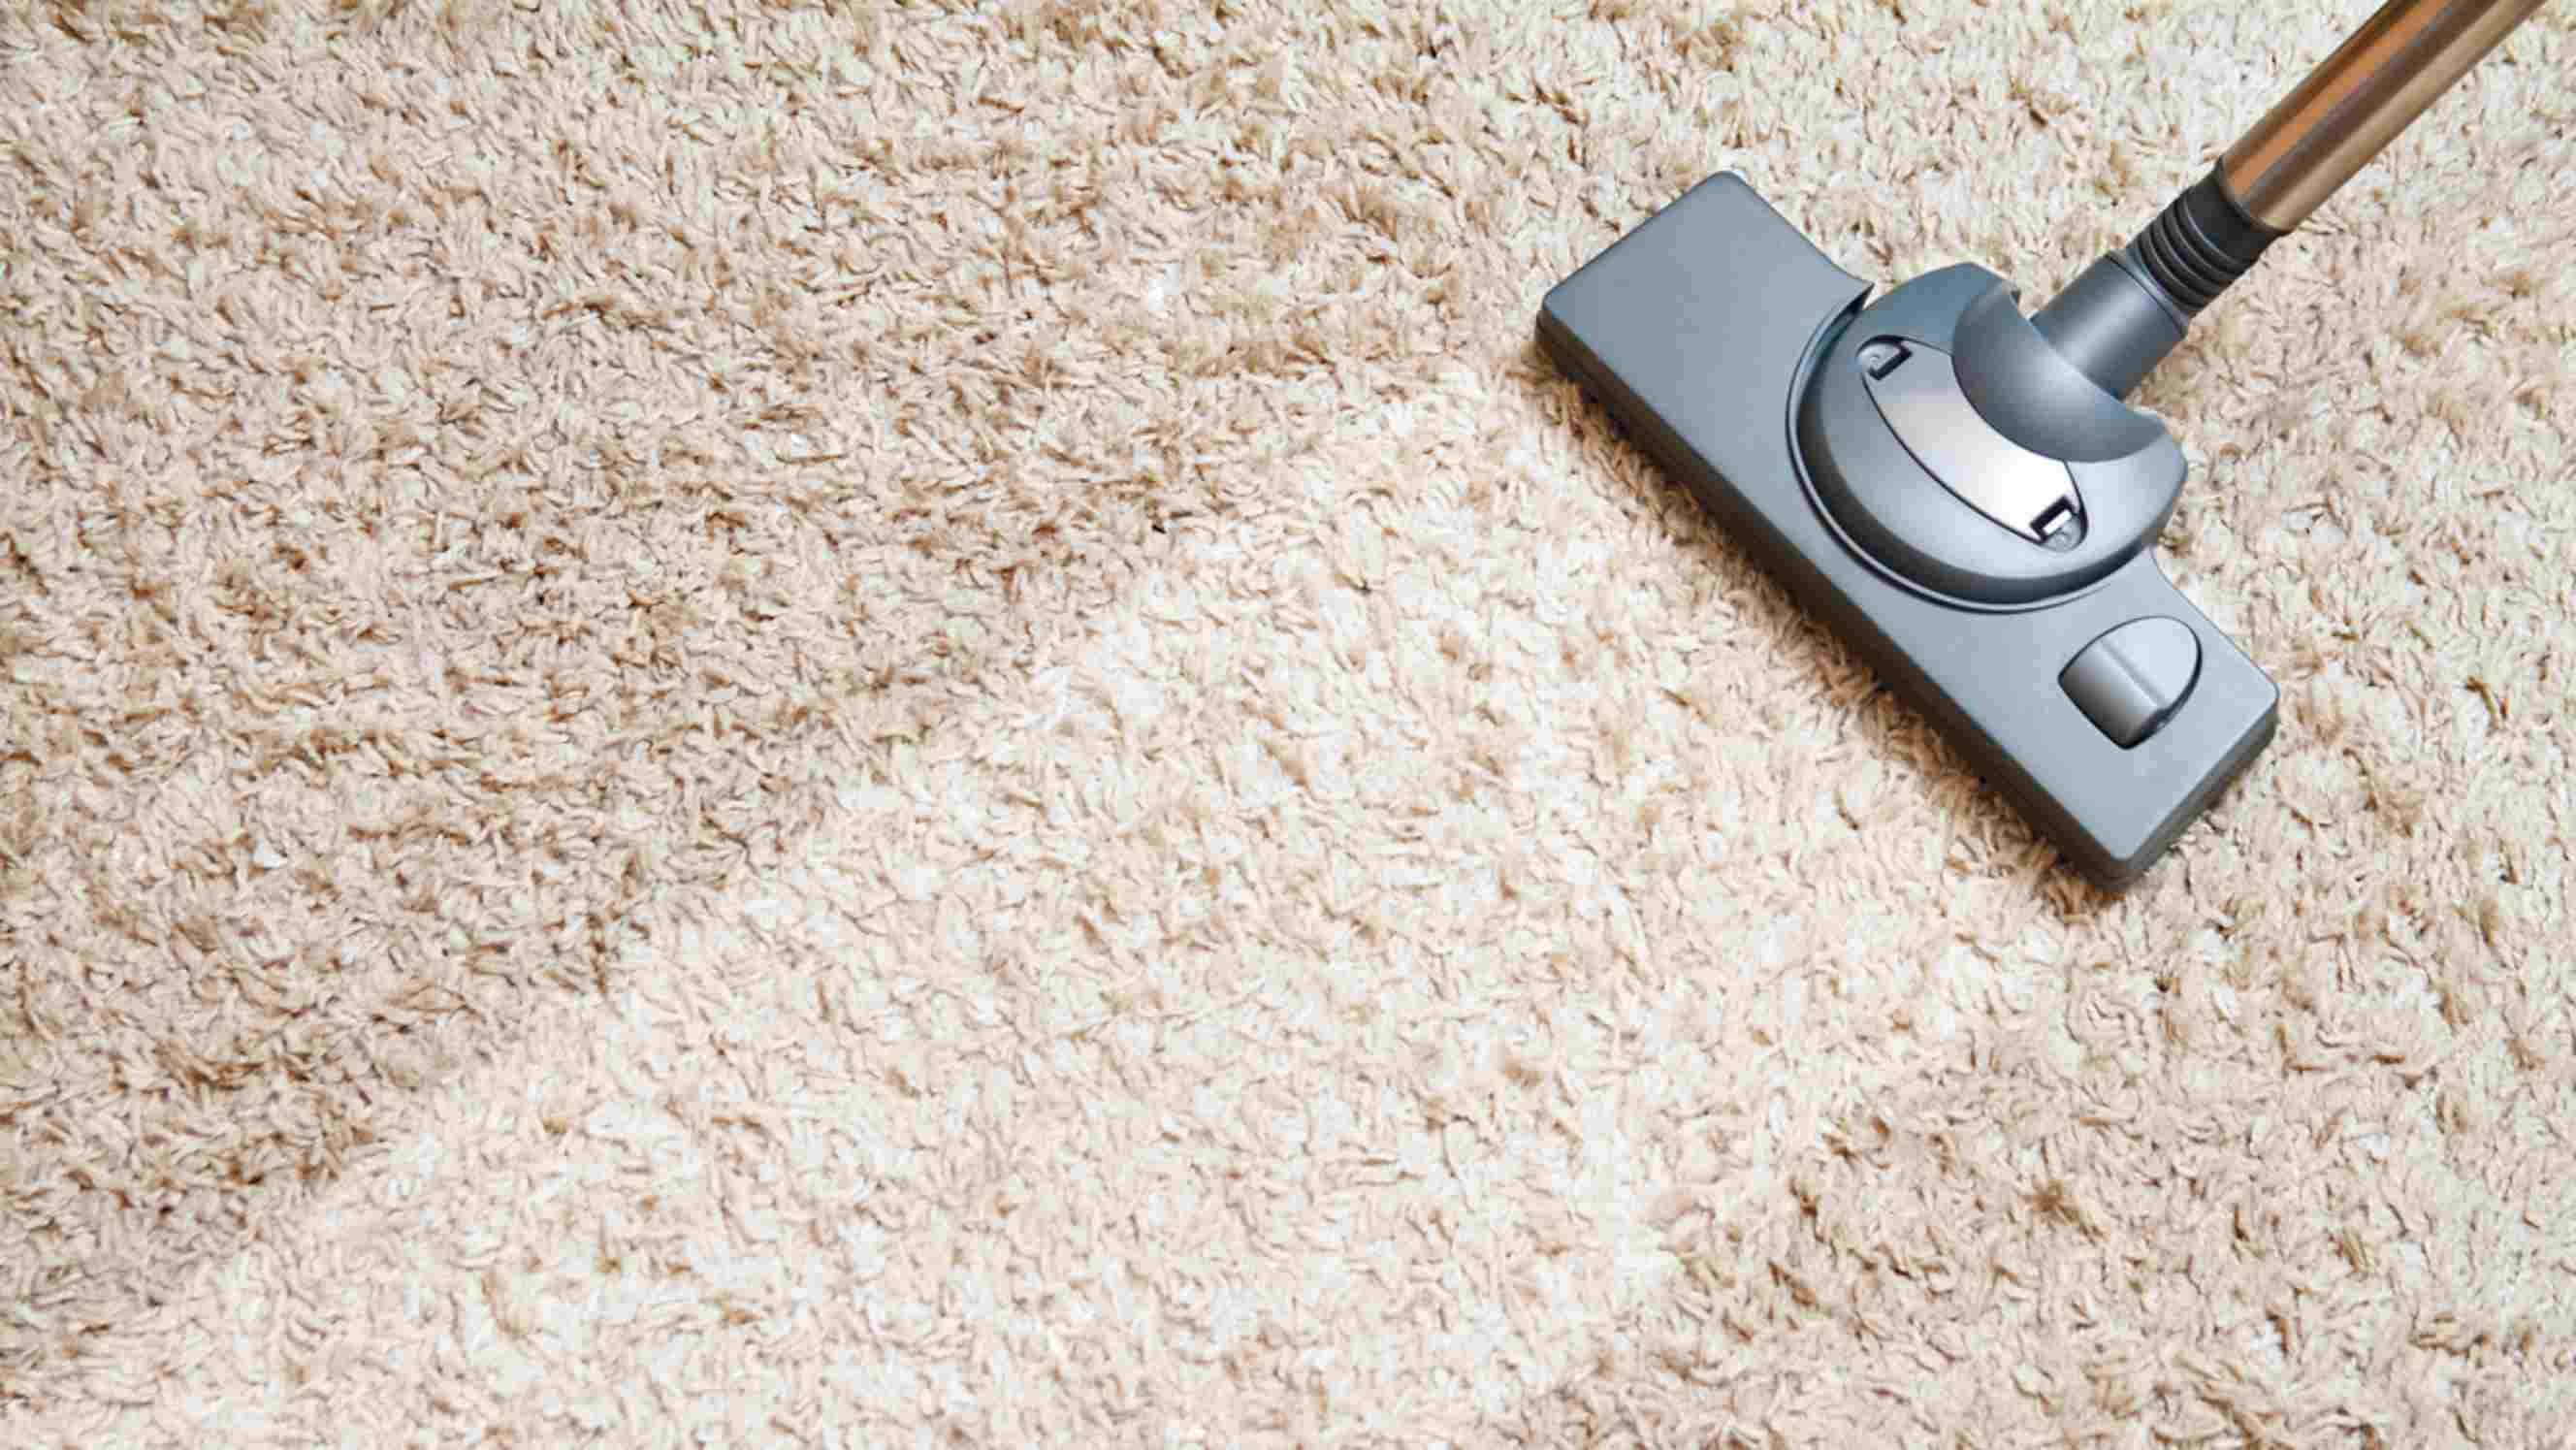 Steam cleaner vs. carpet cleaner - a person using a carpet cleaner to clean a beige carpet